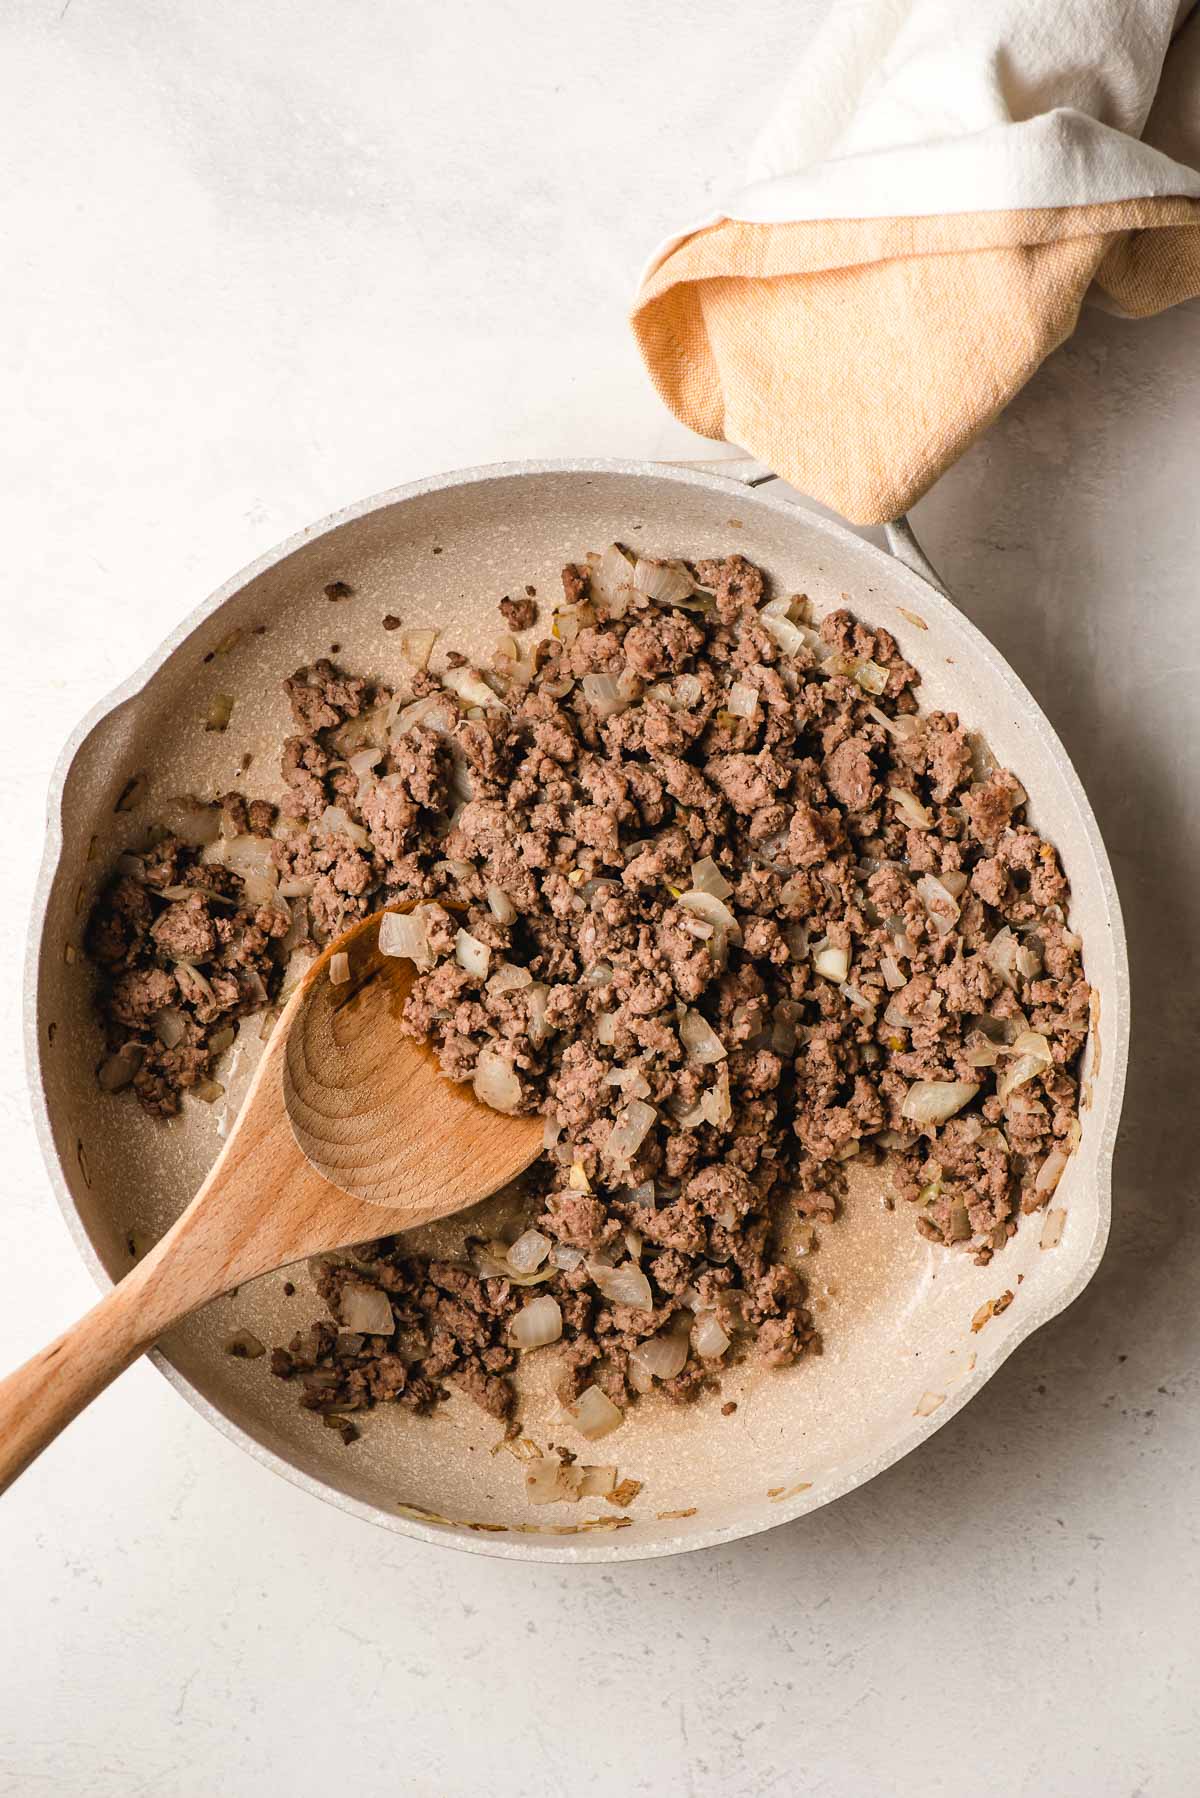 Skillet with sauteed ground beef and onions.